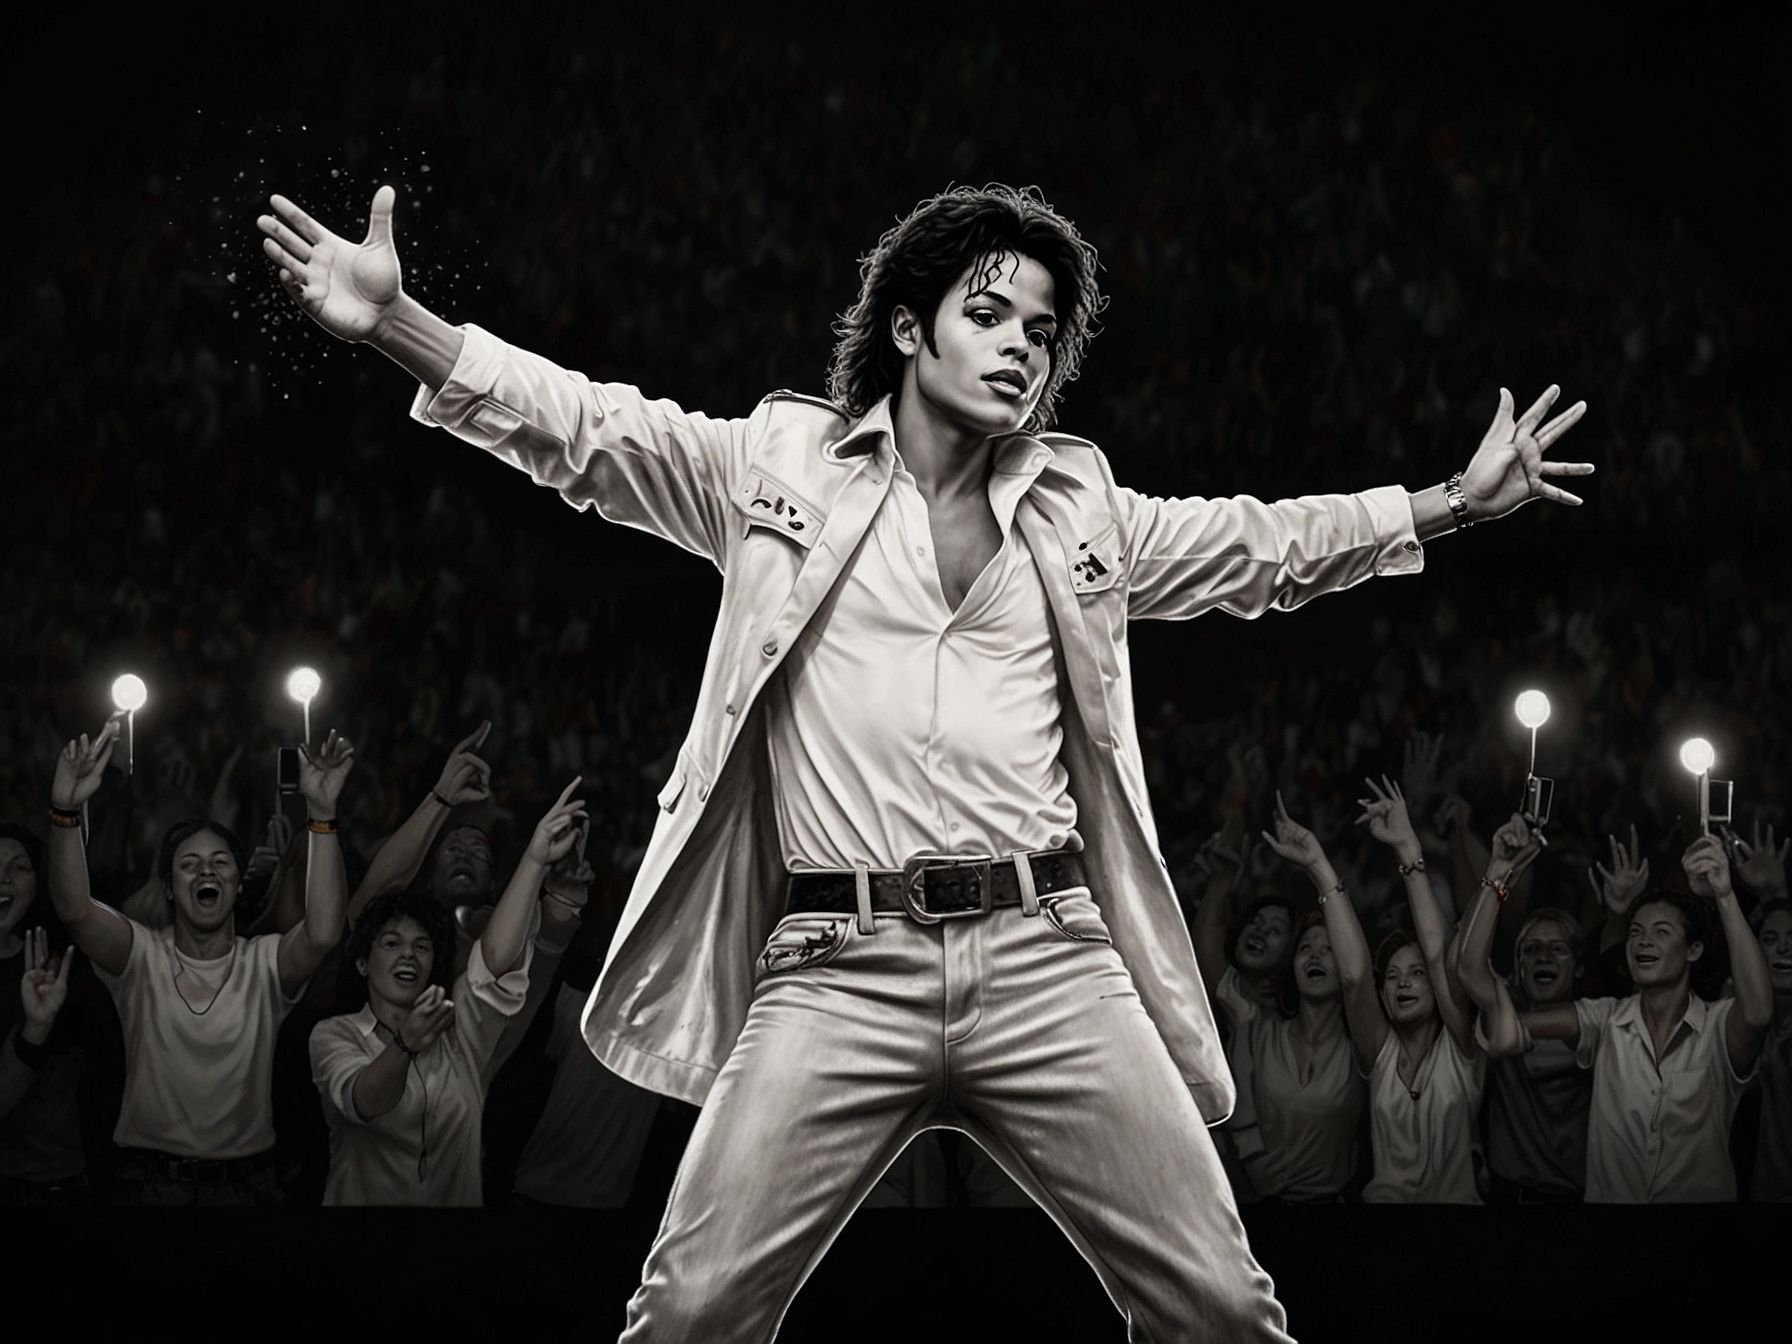 An illustration of Michael Jackson performing on stage, symbolizing his iconic status and the immense earnings from his career, juxtaposed against his financial troubles.